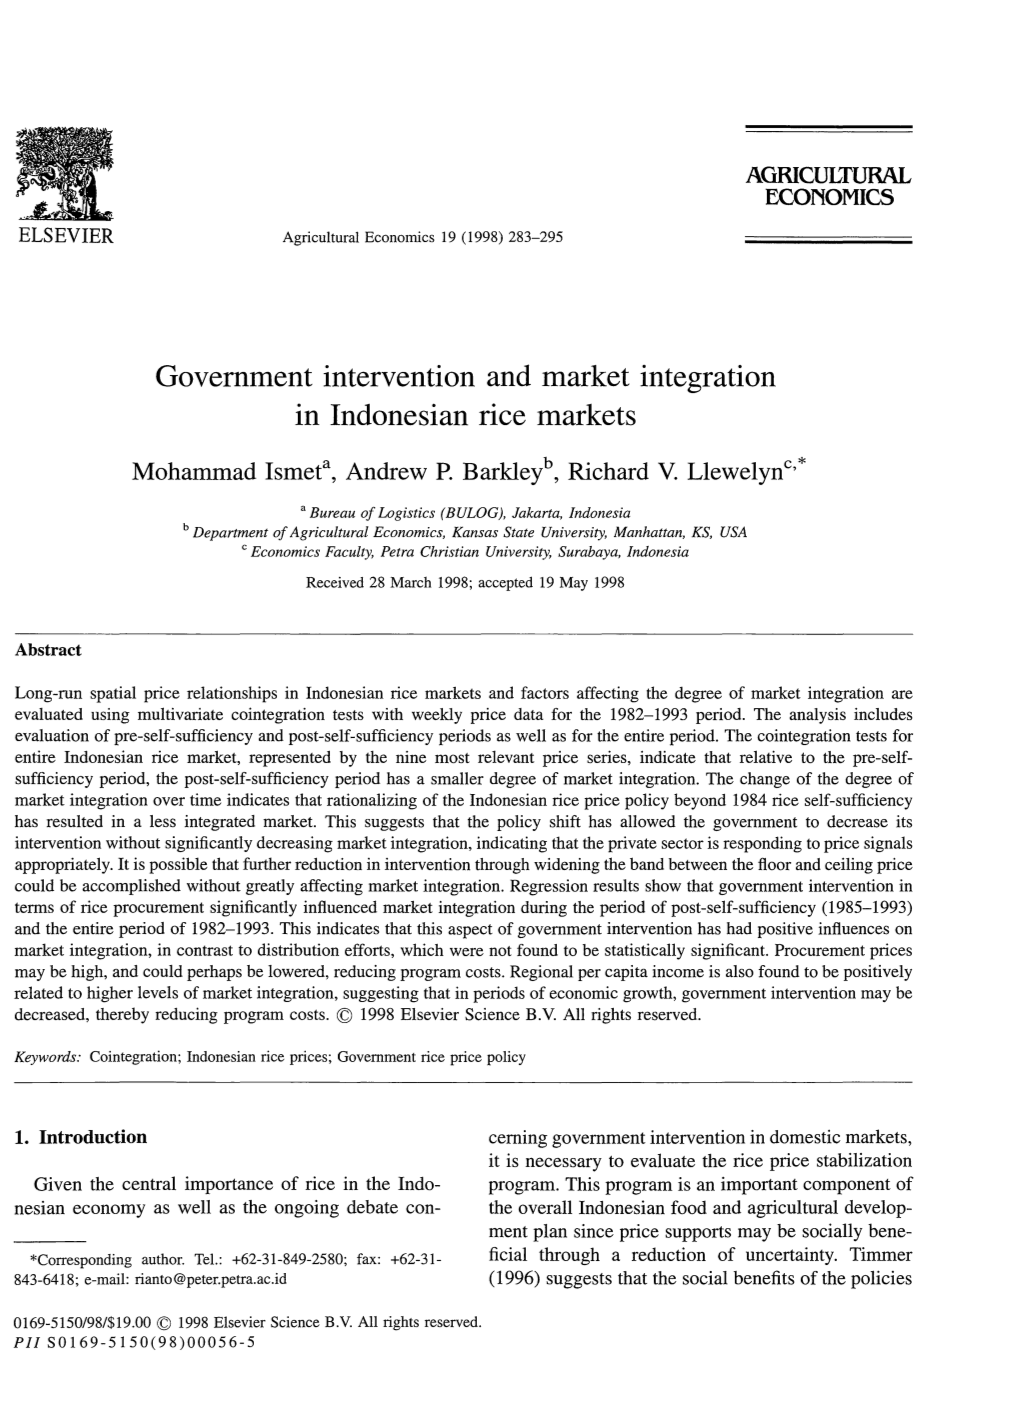 Government Intervention and Market Integration in Indonesian Rice Markets